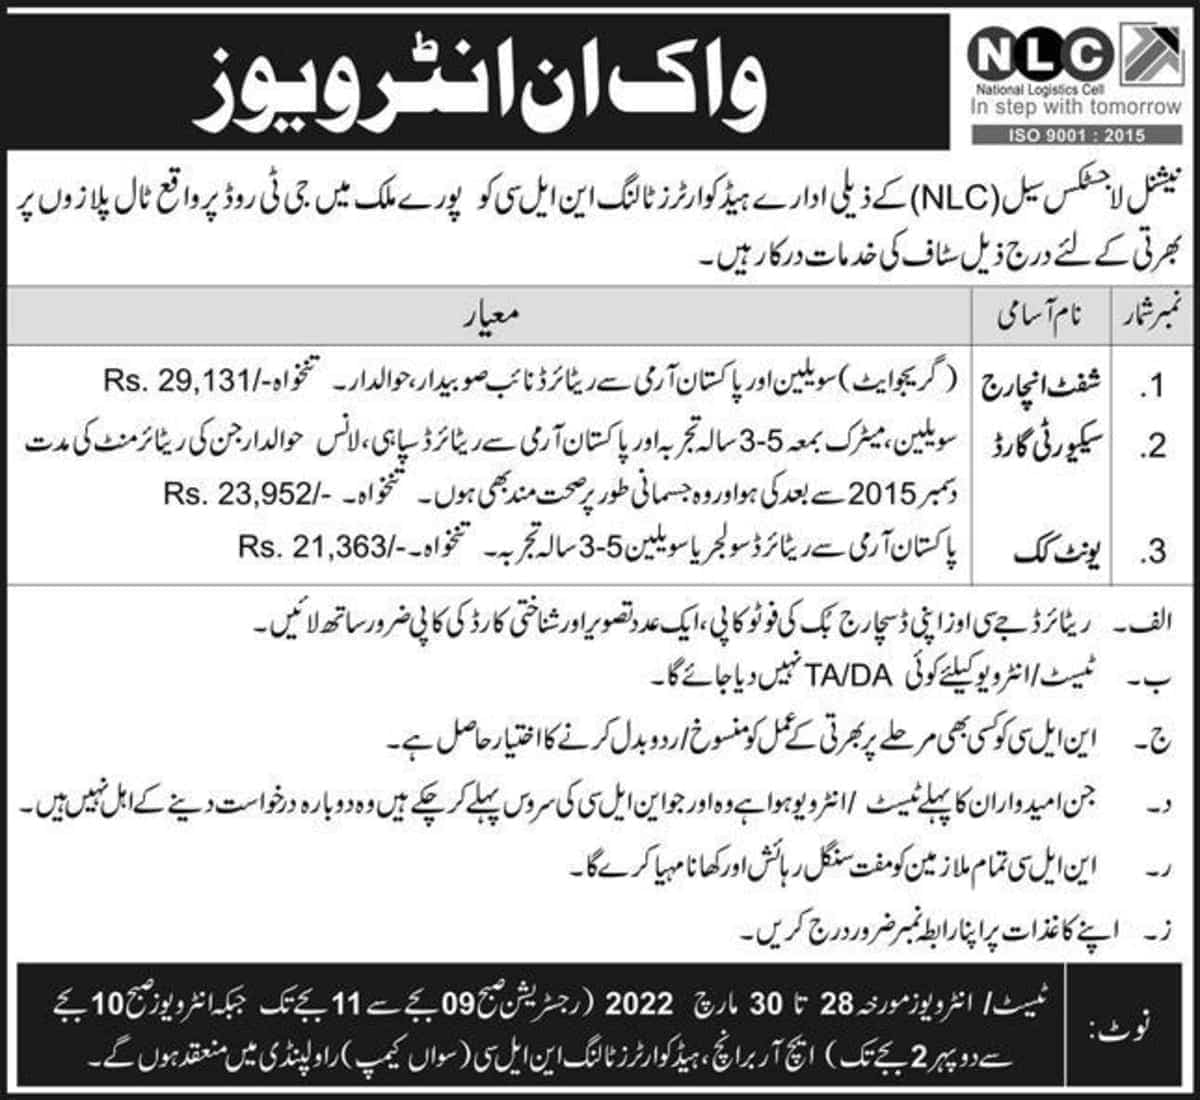 National Logistics Cell NLC Toll Plaza Jobs 2022 Walk in Interview